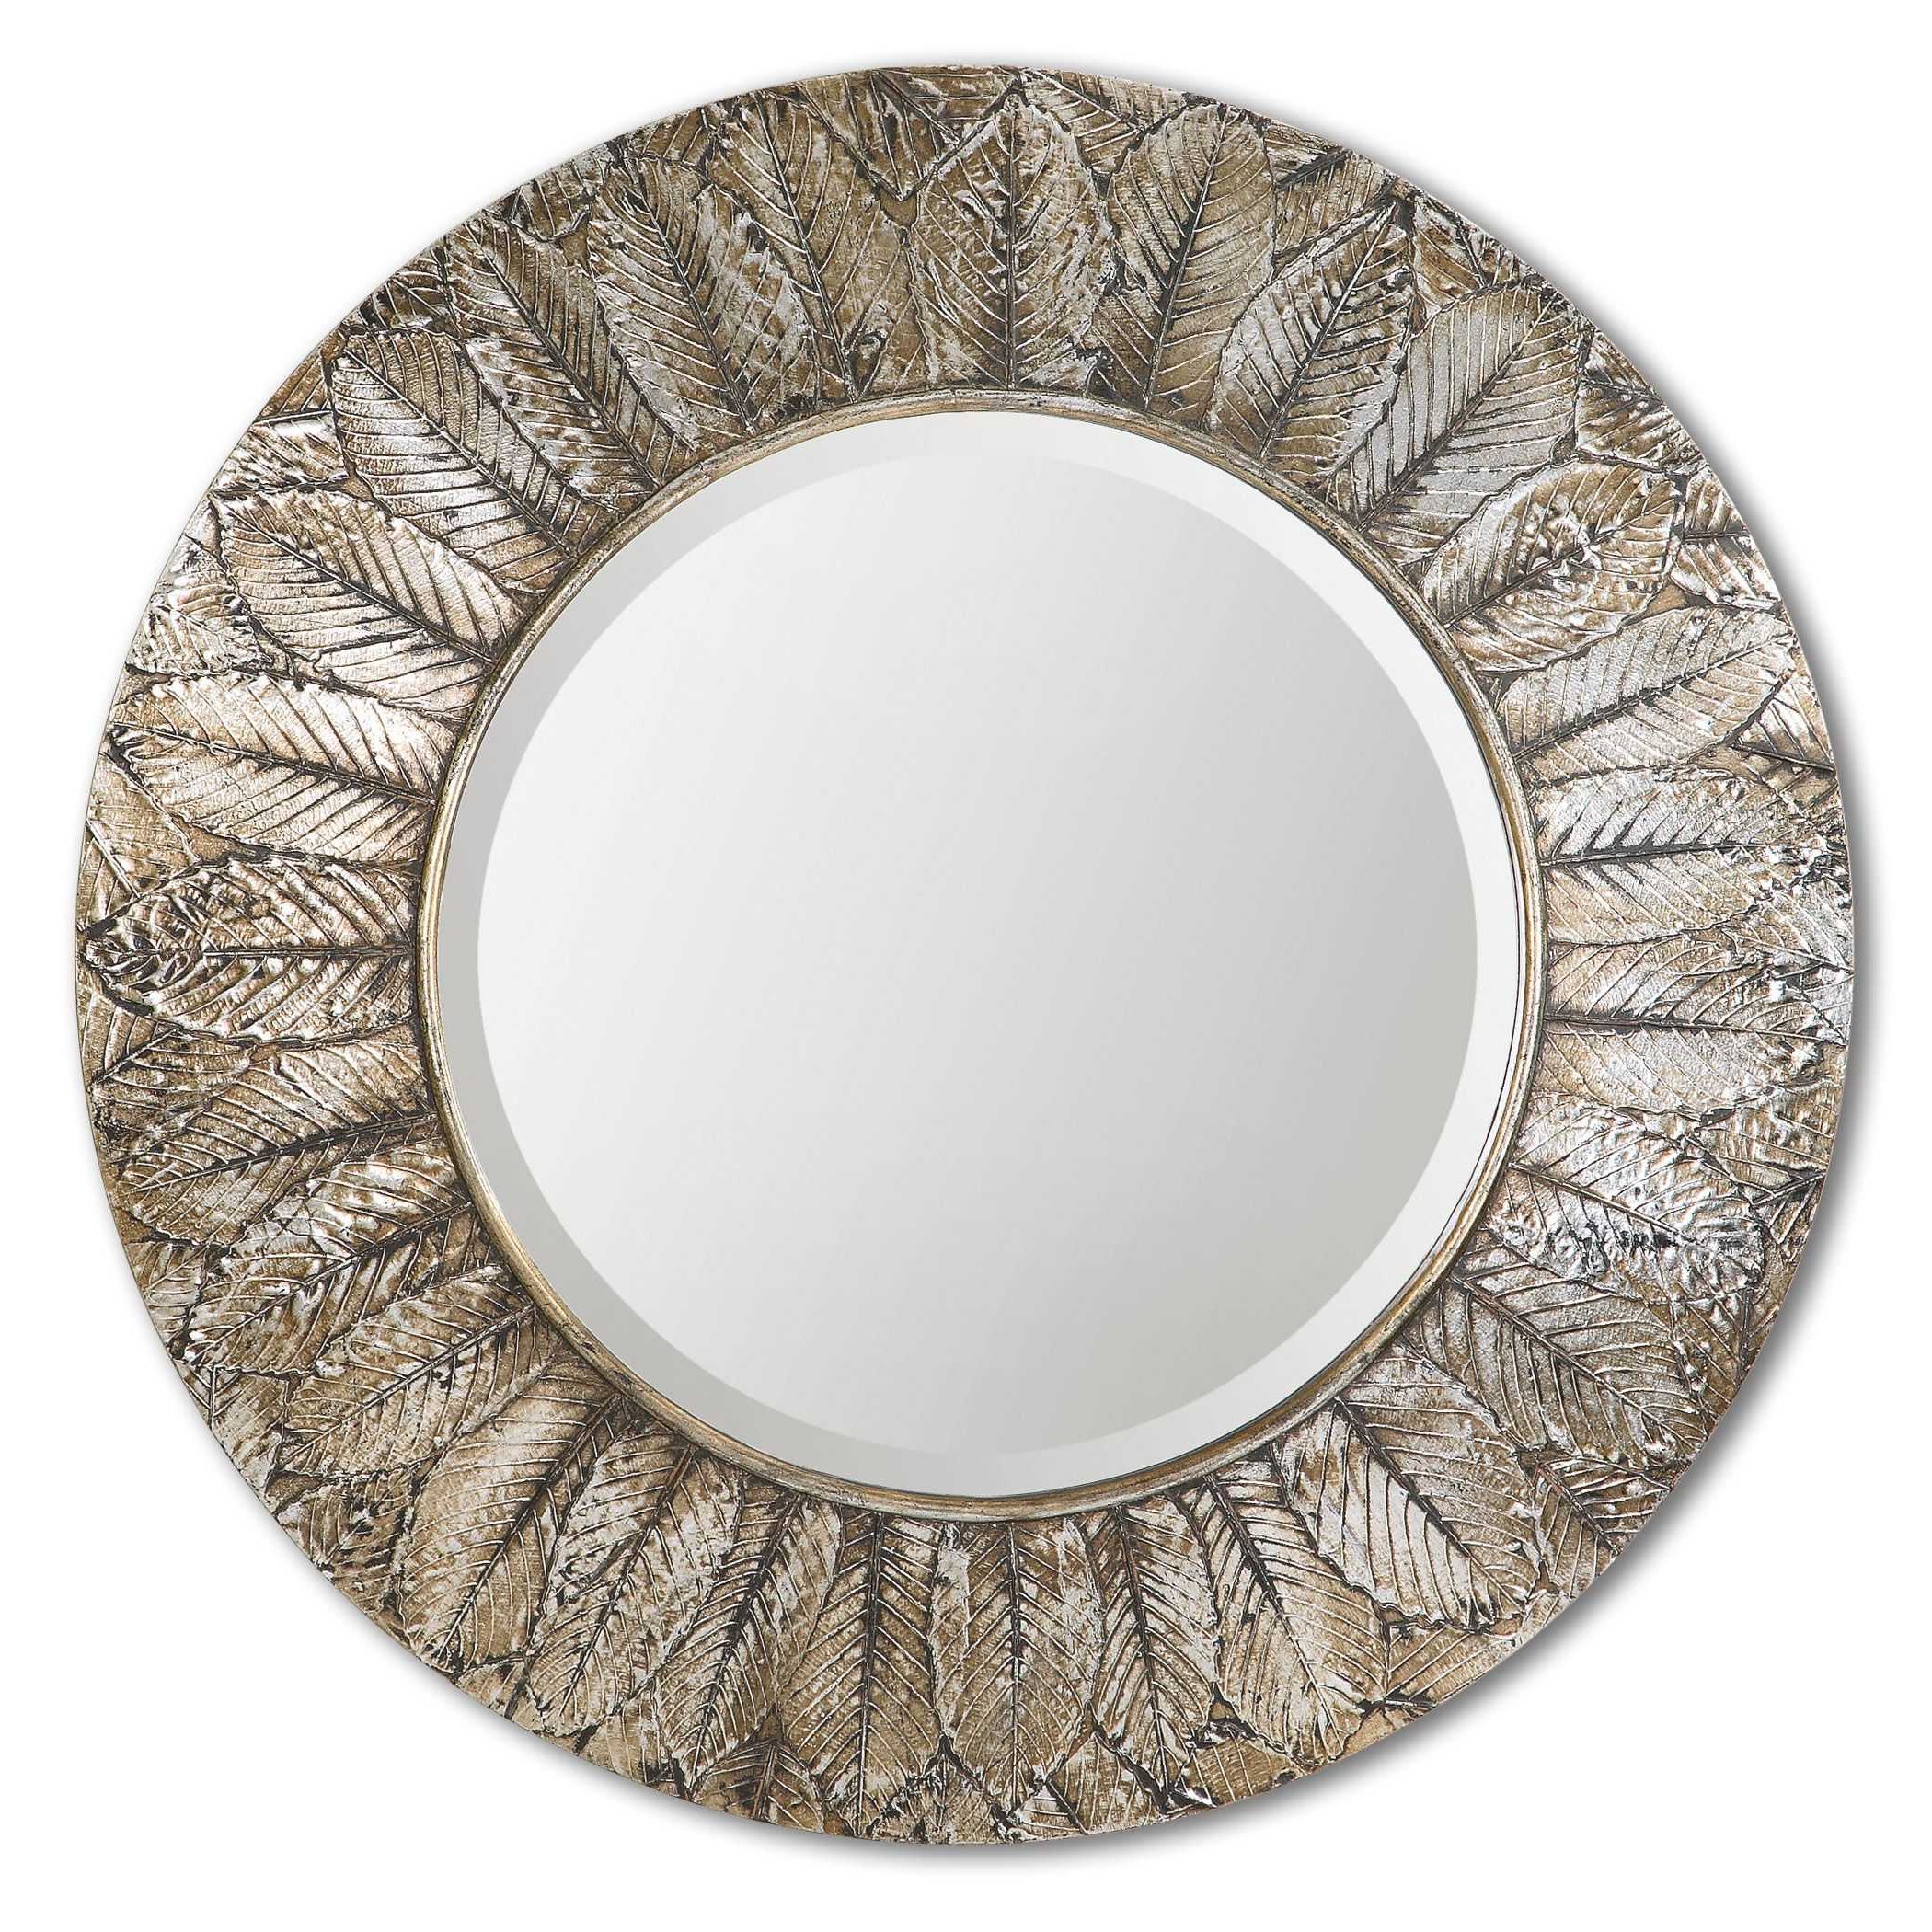 Silver Leaf Round Wall Mirrors Throughout Best And Newest Uttermost Foliage Round Silver Leaf Mirror (View 2 of 15)